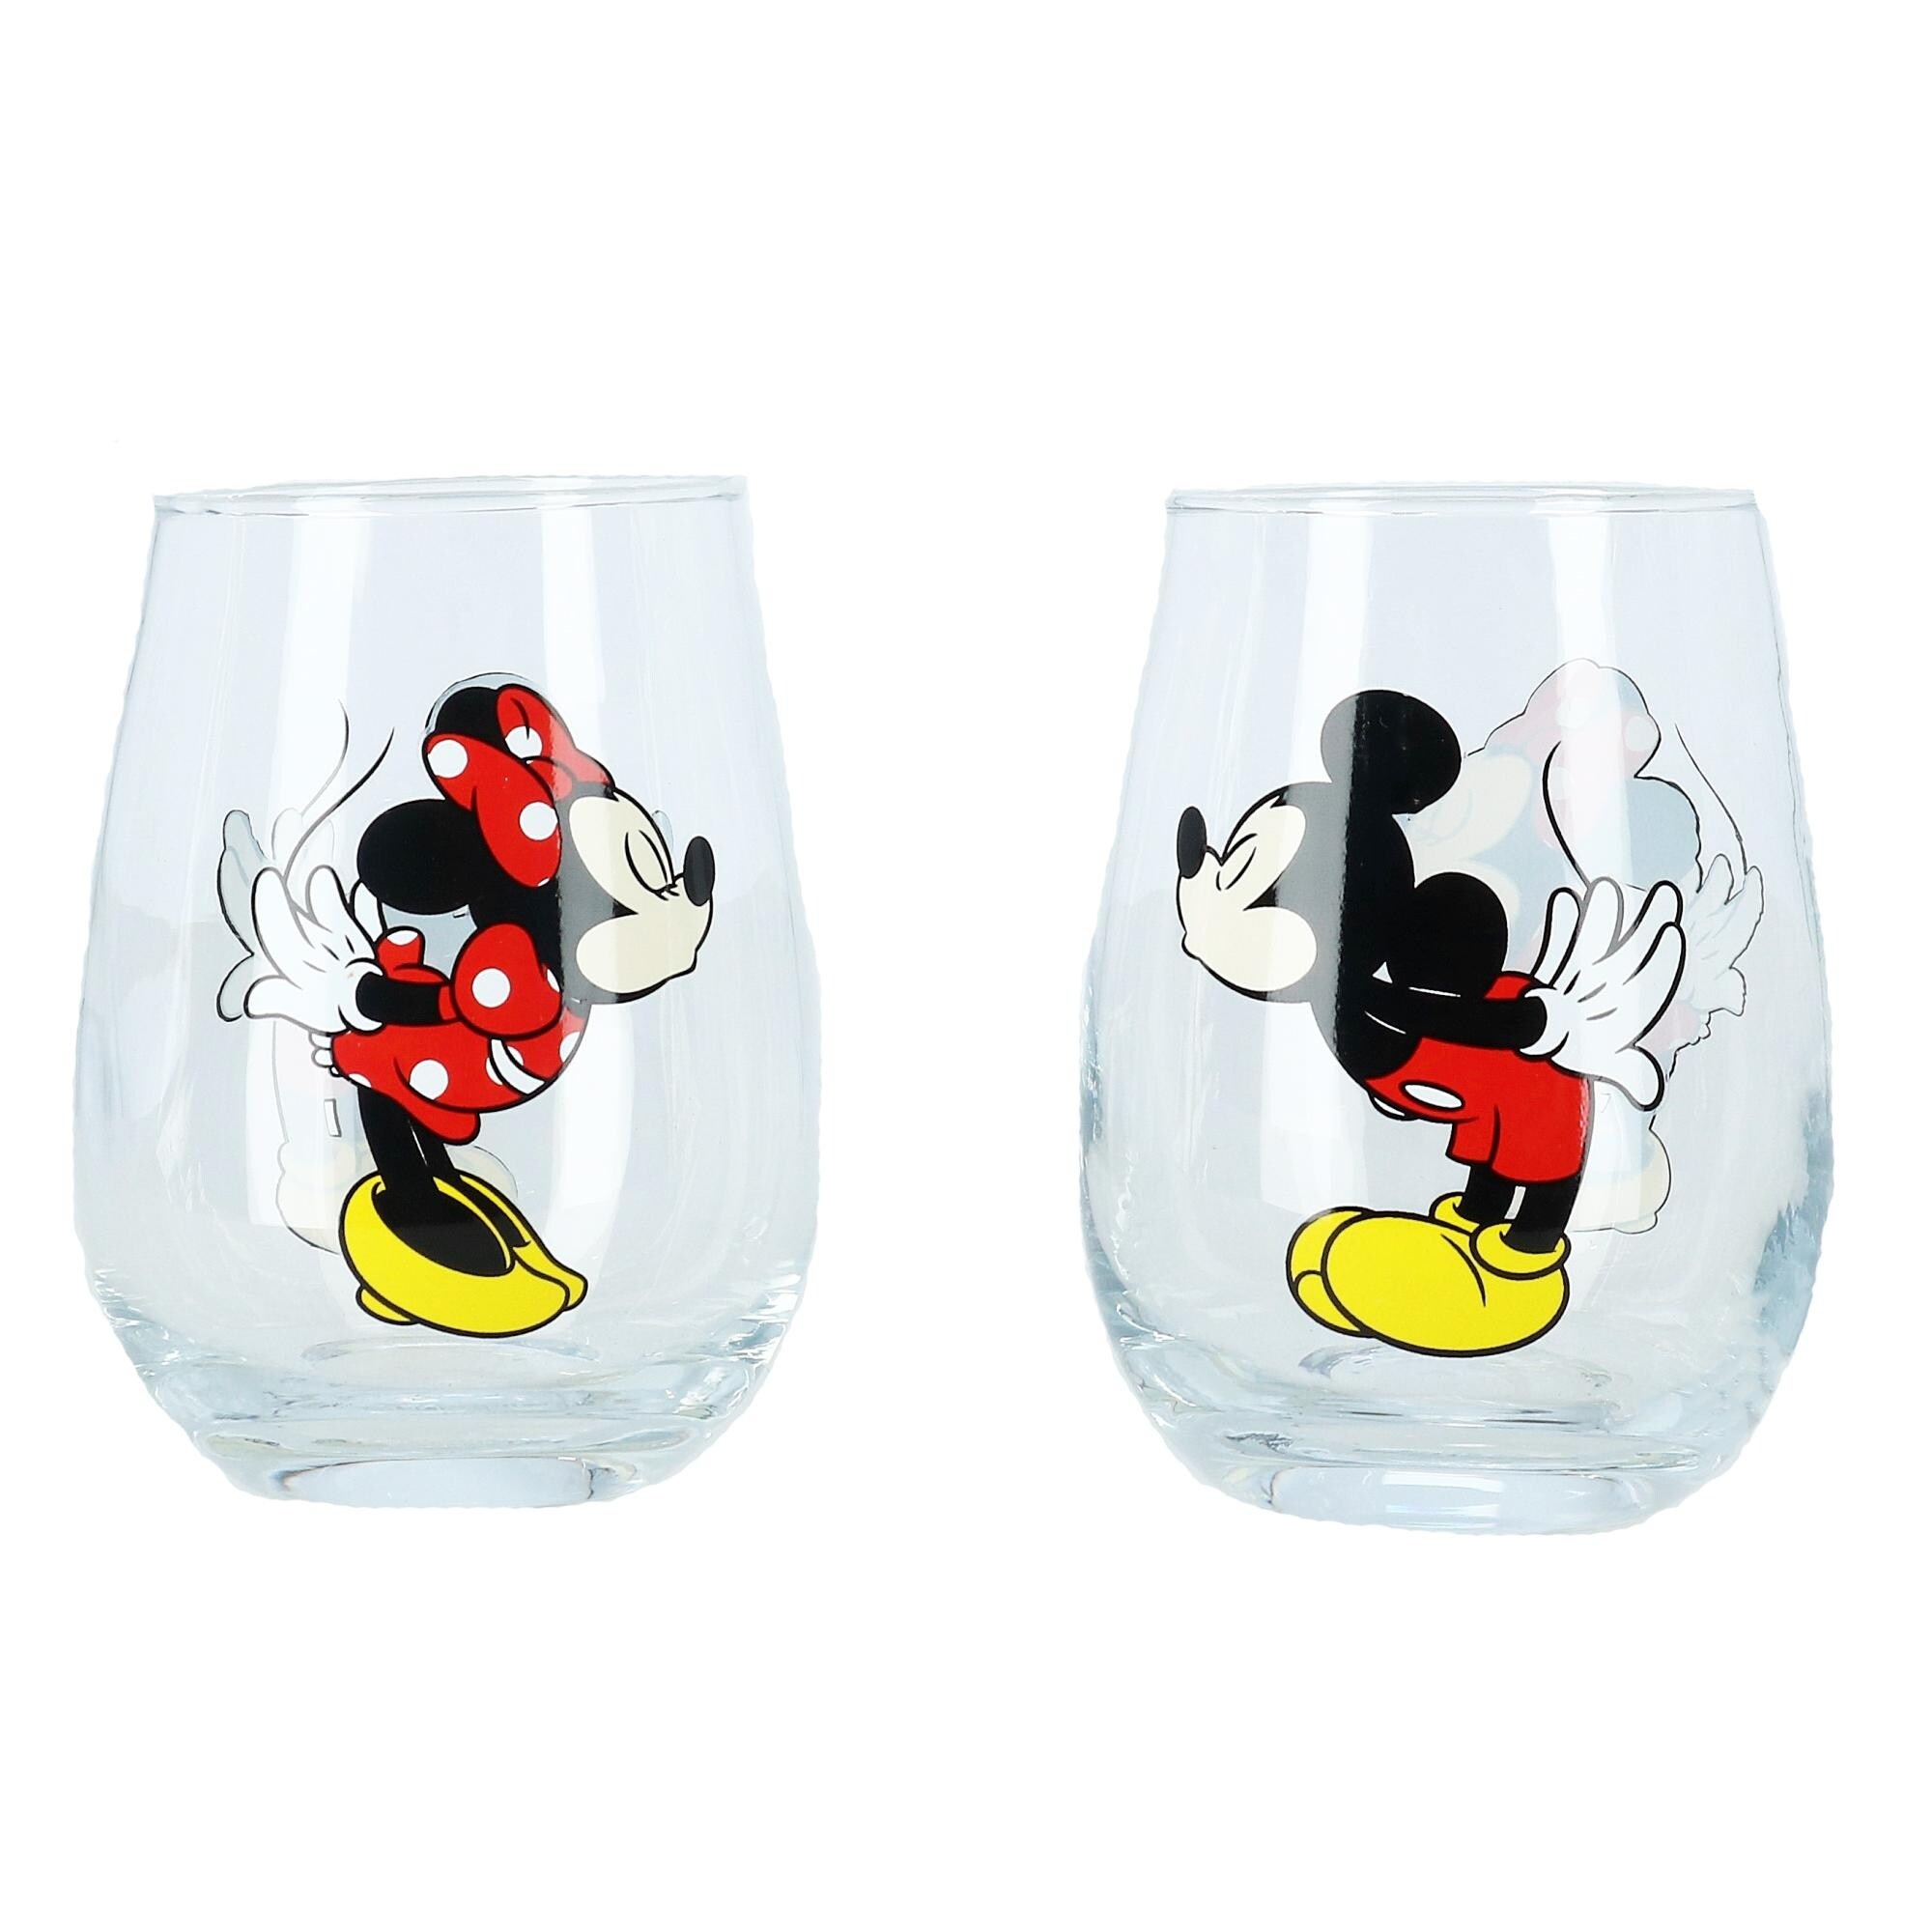 https://ak1.ostkcdn.com/images/products/is/images/direct/59baacd5404b6c48fa59ae59a54c15cfa1a8642c/Disney-Mickey-and-Minnie-Mouse-Kissing-Wine-Glasses.jpg